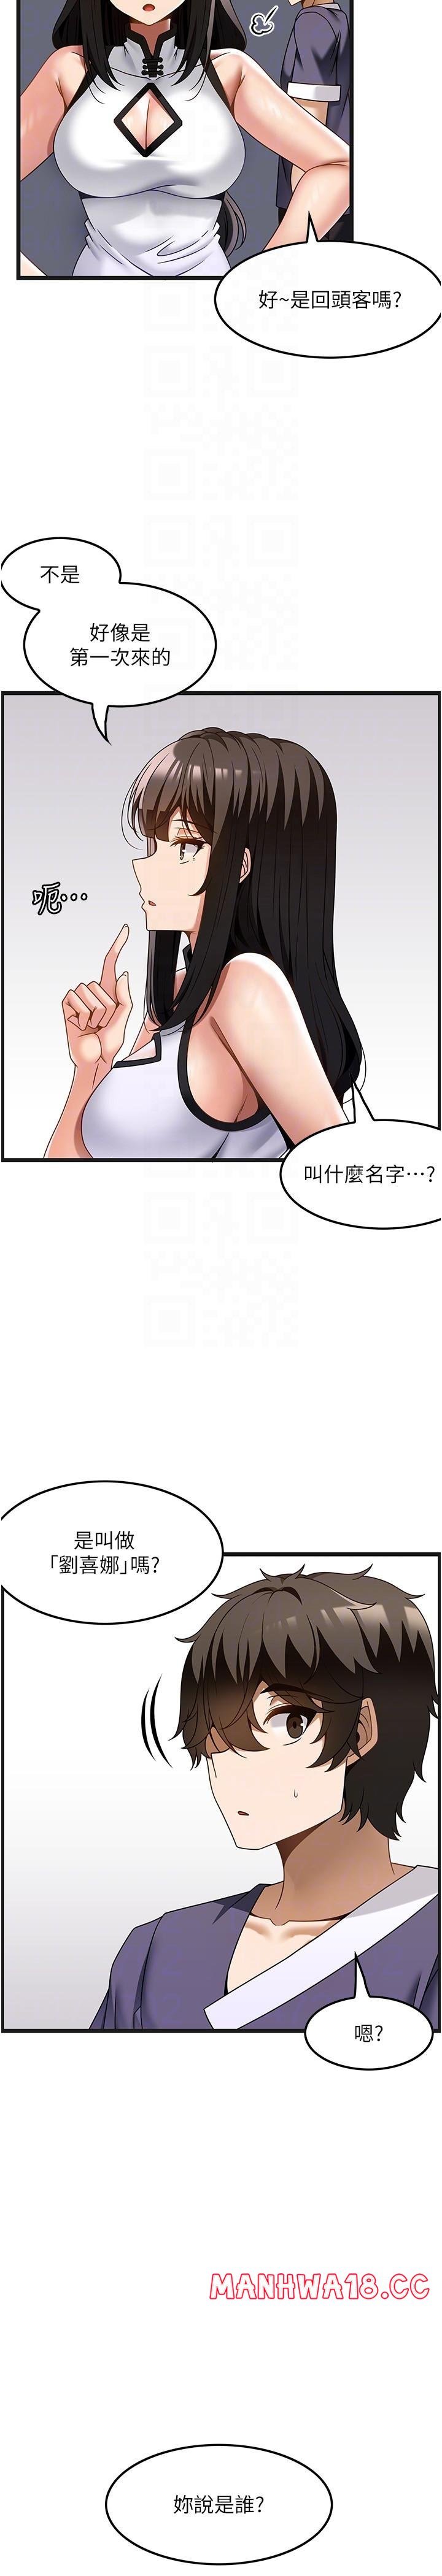 too-good-at-massages-raw-chap-34-13